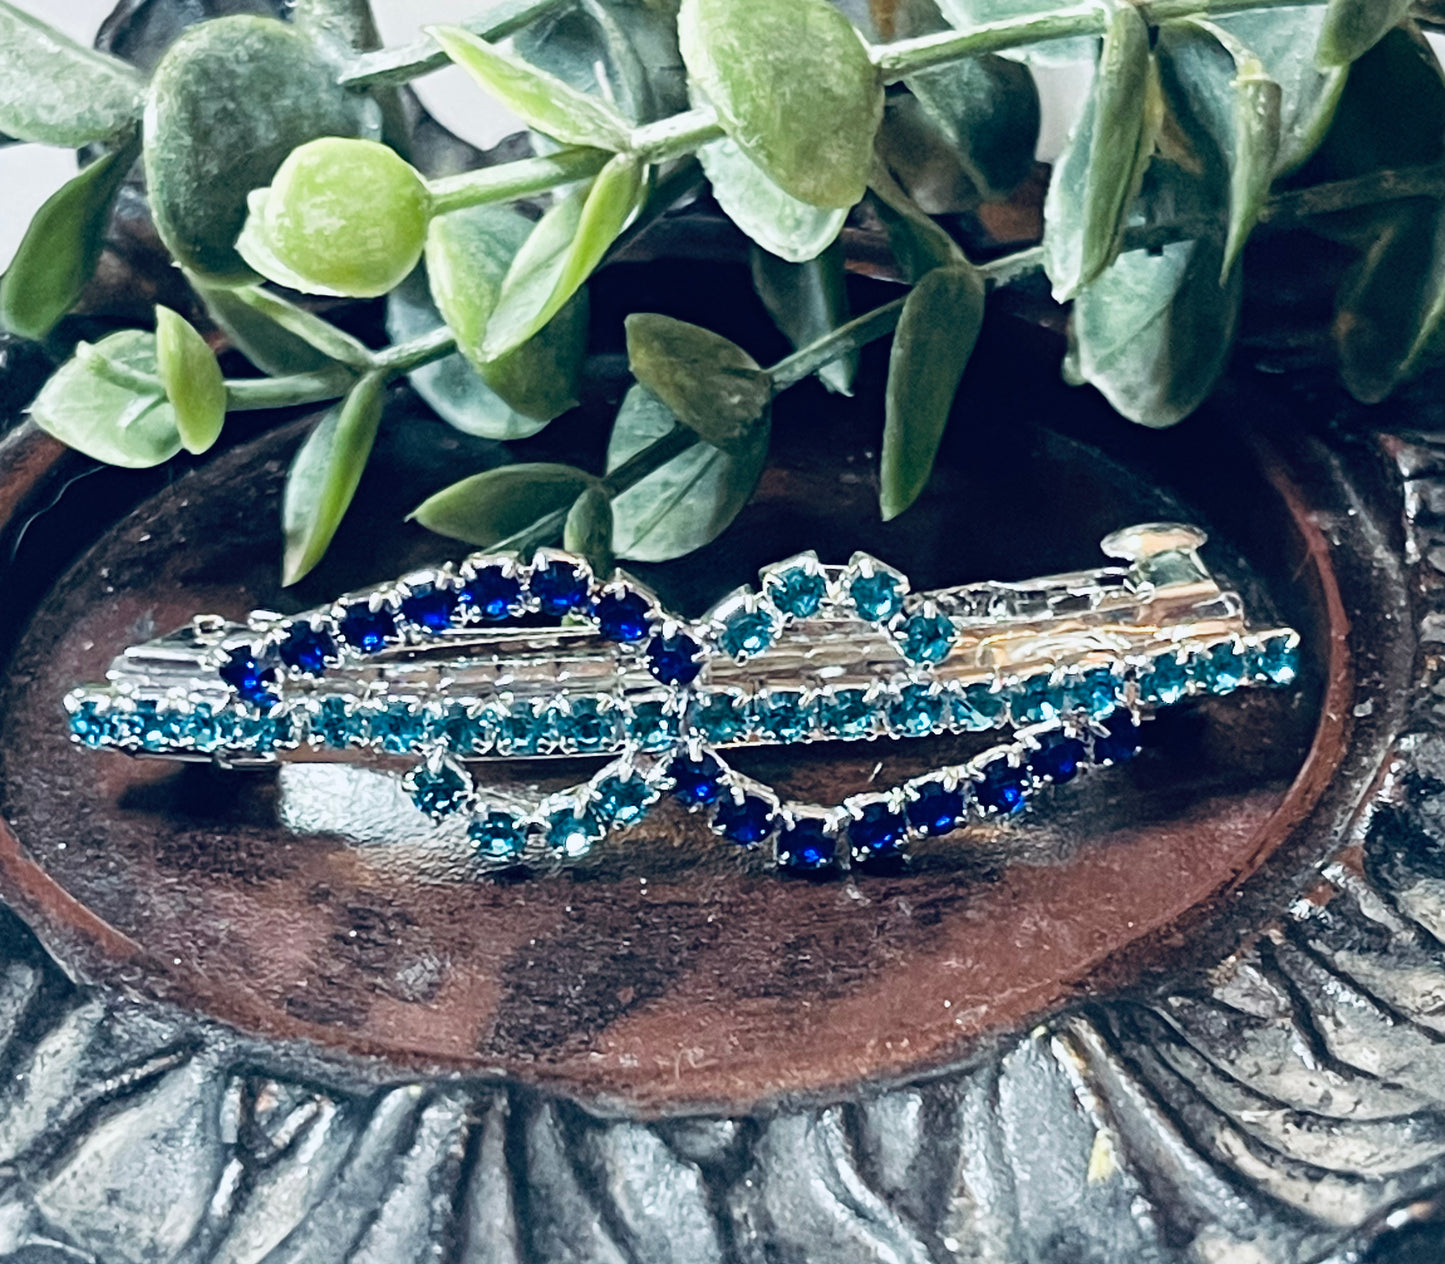 Teal blue Crystal rhinestone barrette approximately 3.0” silver tone formal hair accessories gift wedding bridesmaid prom birthday mother of bride groom